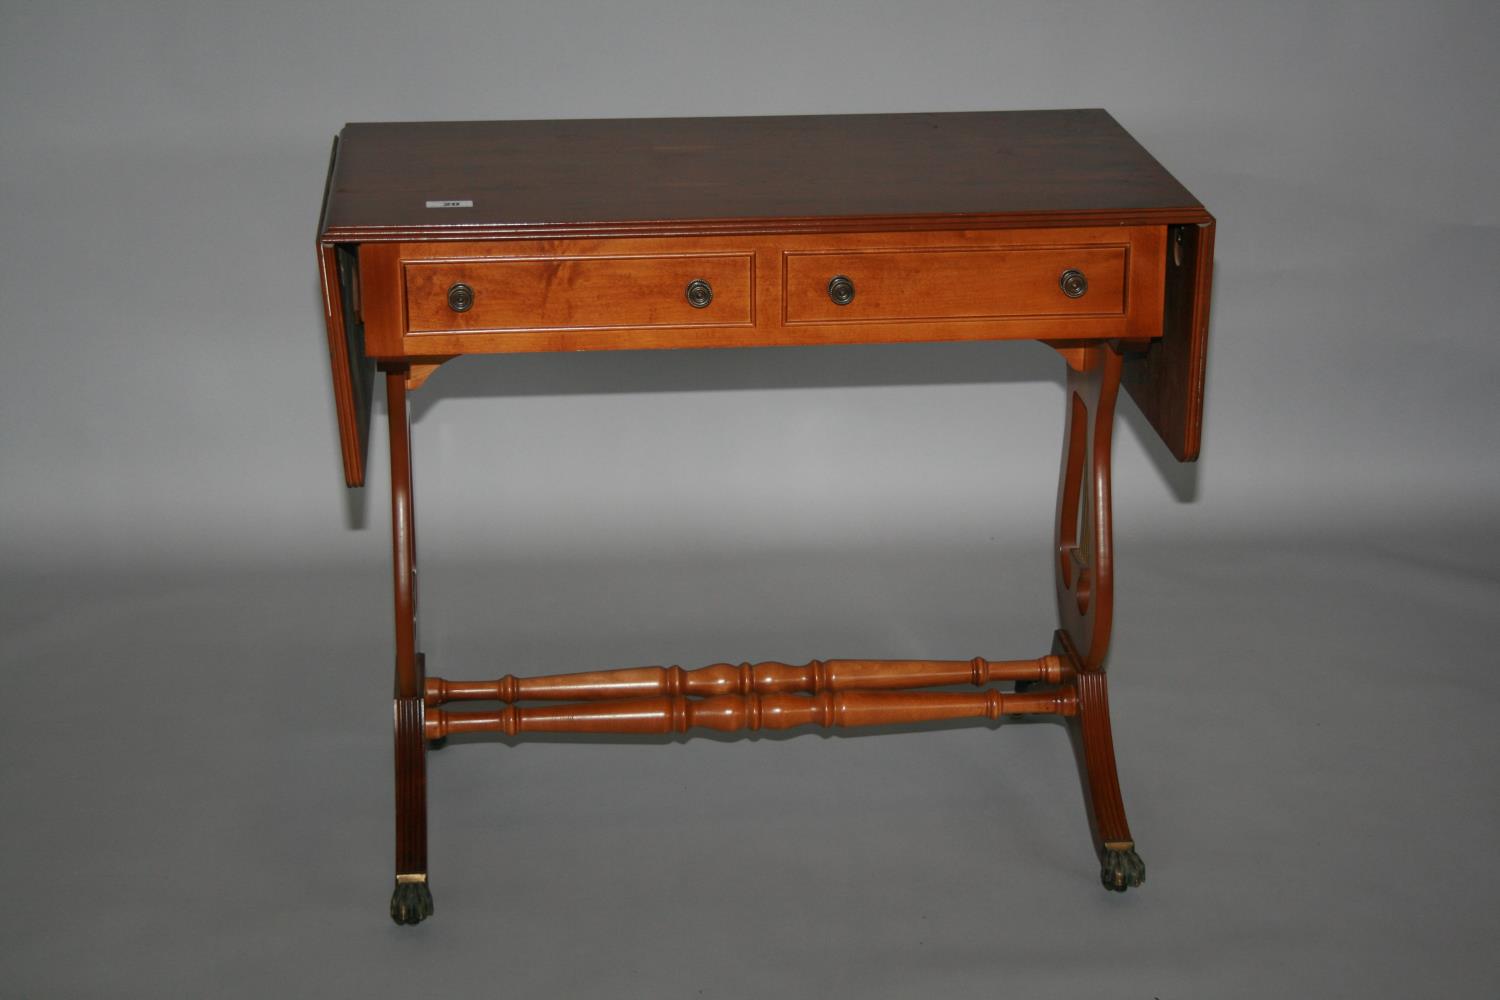 Yew wood sofa table and matching side table with two drawers 90 W x 75 H x 50 D and 90 W x 75 H x 45 - Image 3 of 3